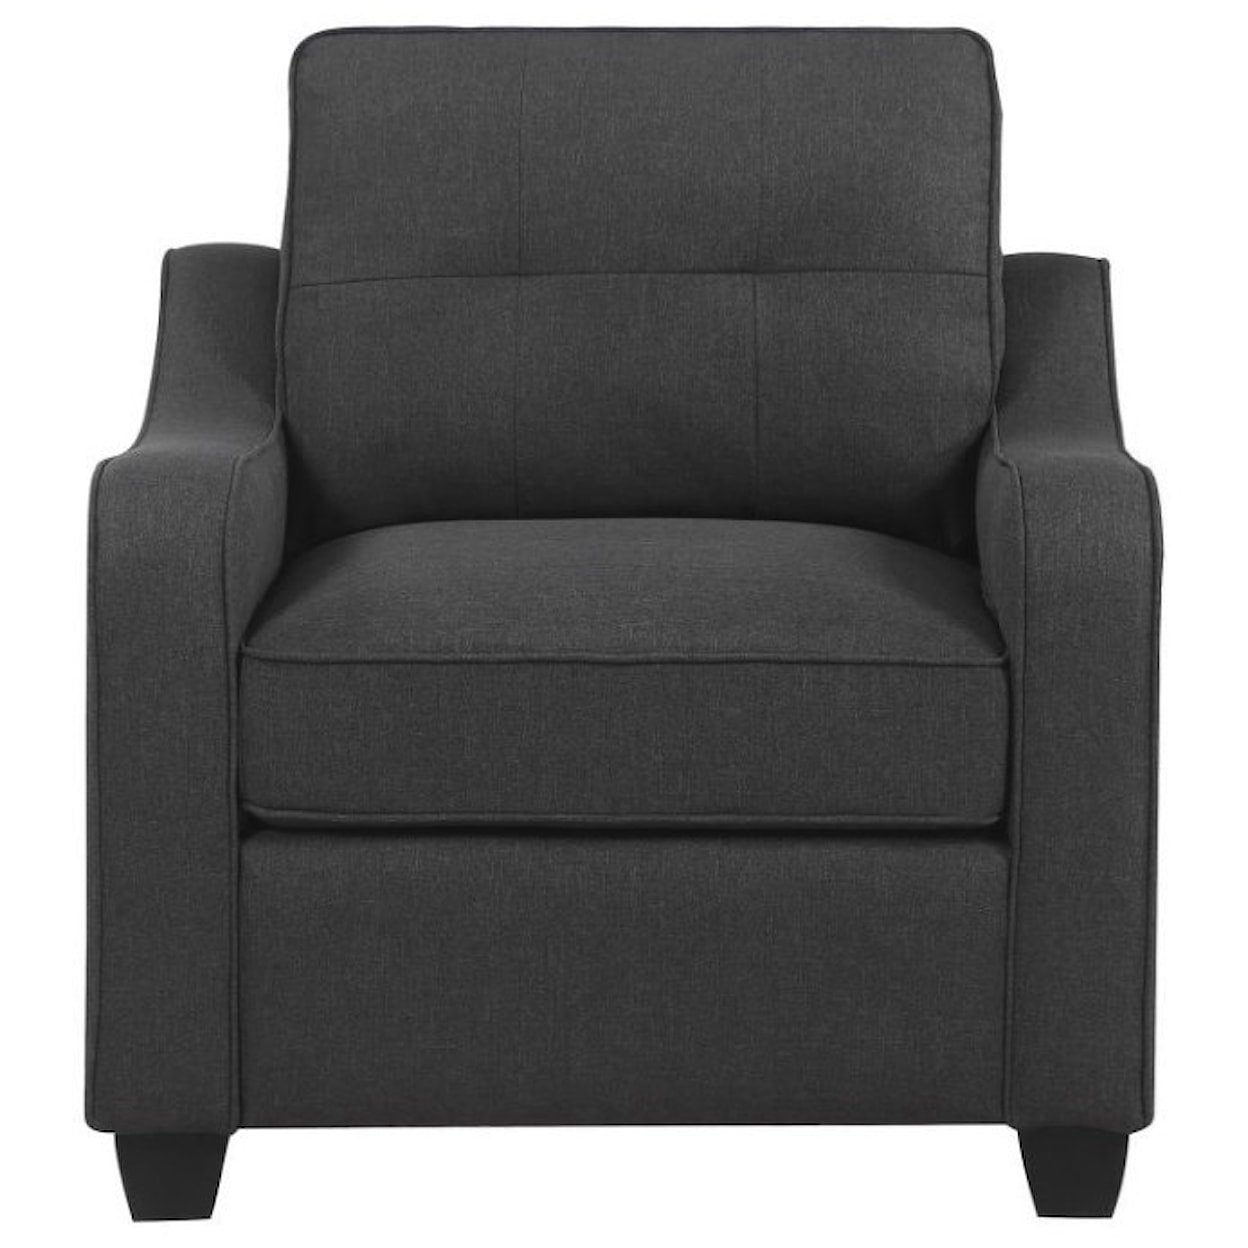 Coaster 508320 Upholstered Chair